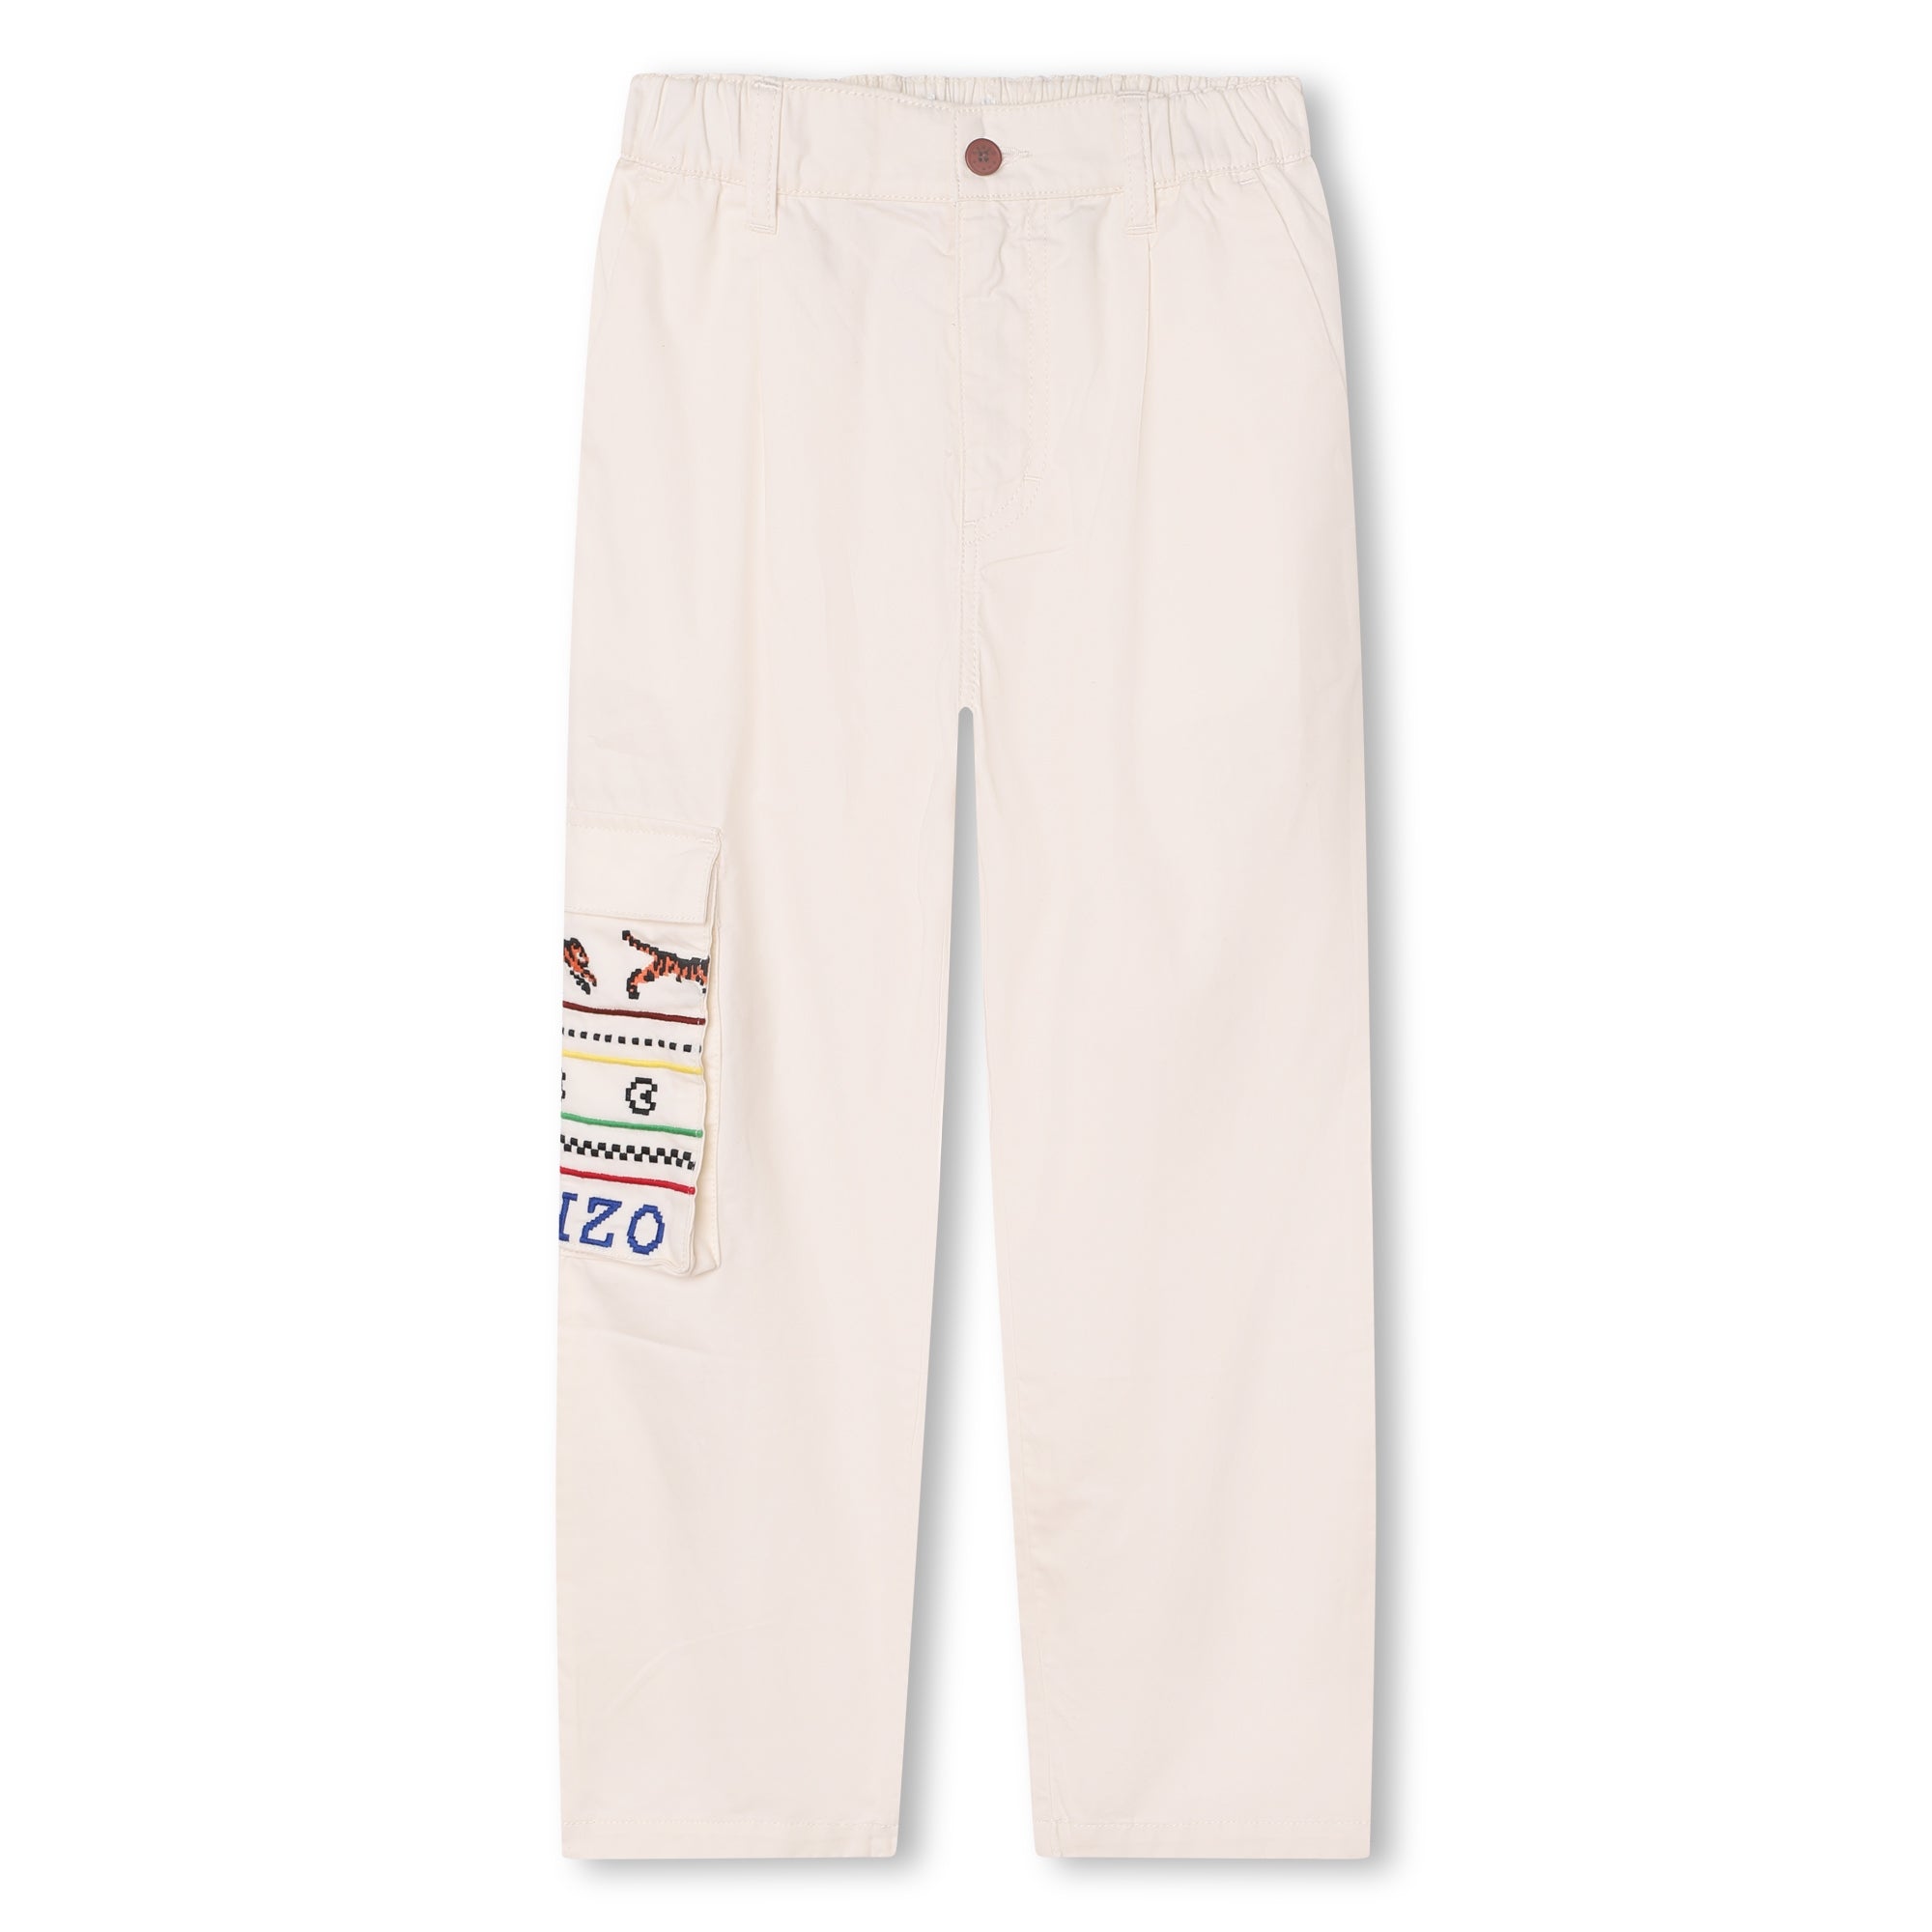 Boys White Embroidered Cotton Trousers